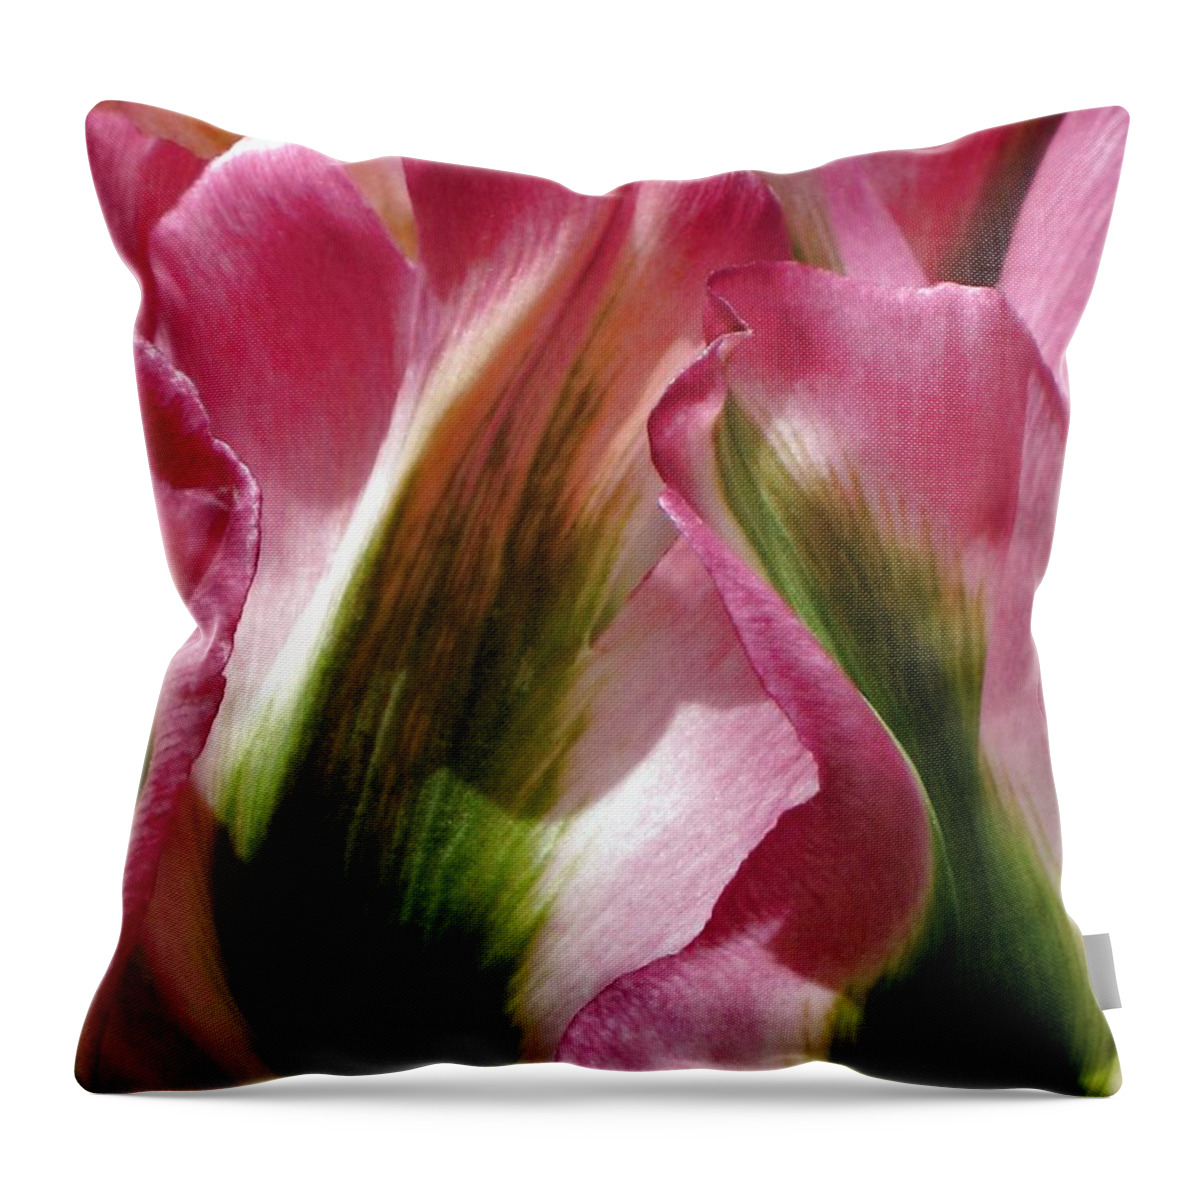 Tulip Throw Pillow featuring the photograph Tulip by Andrea Lazar